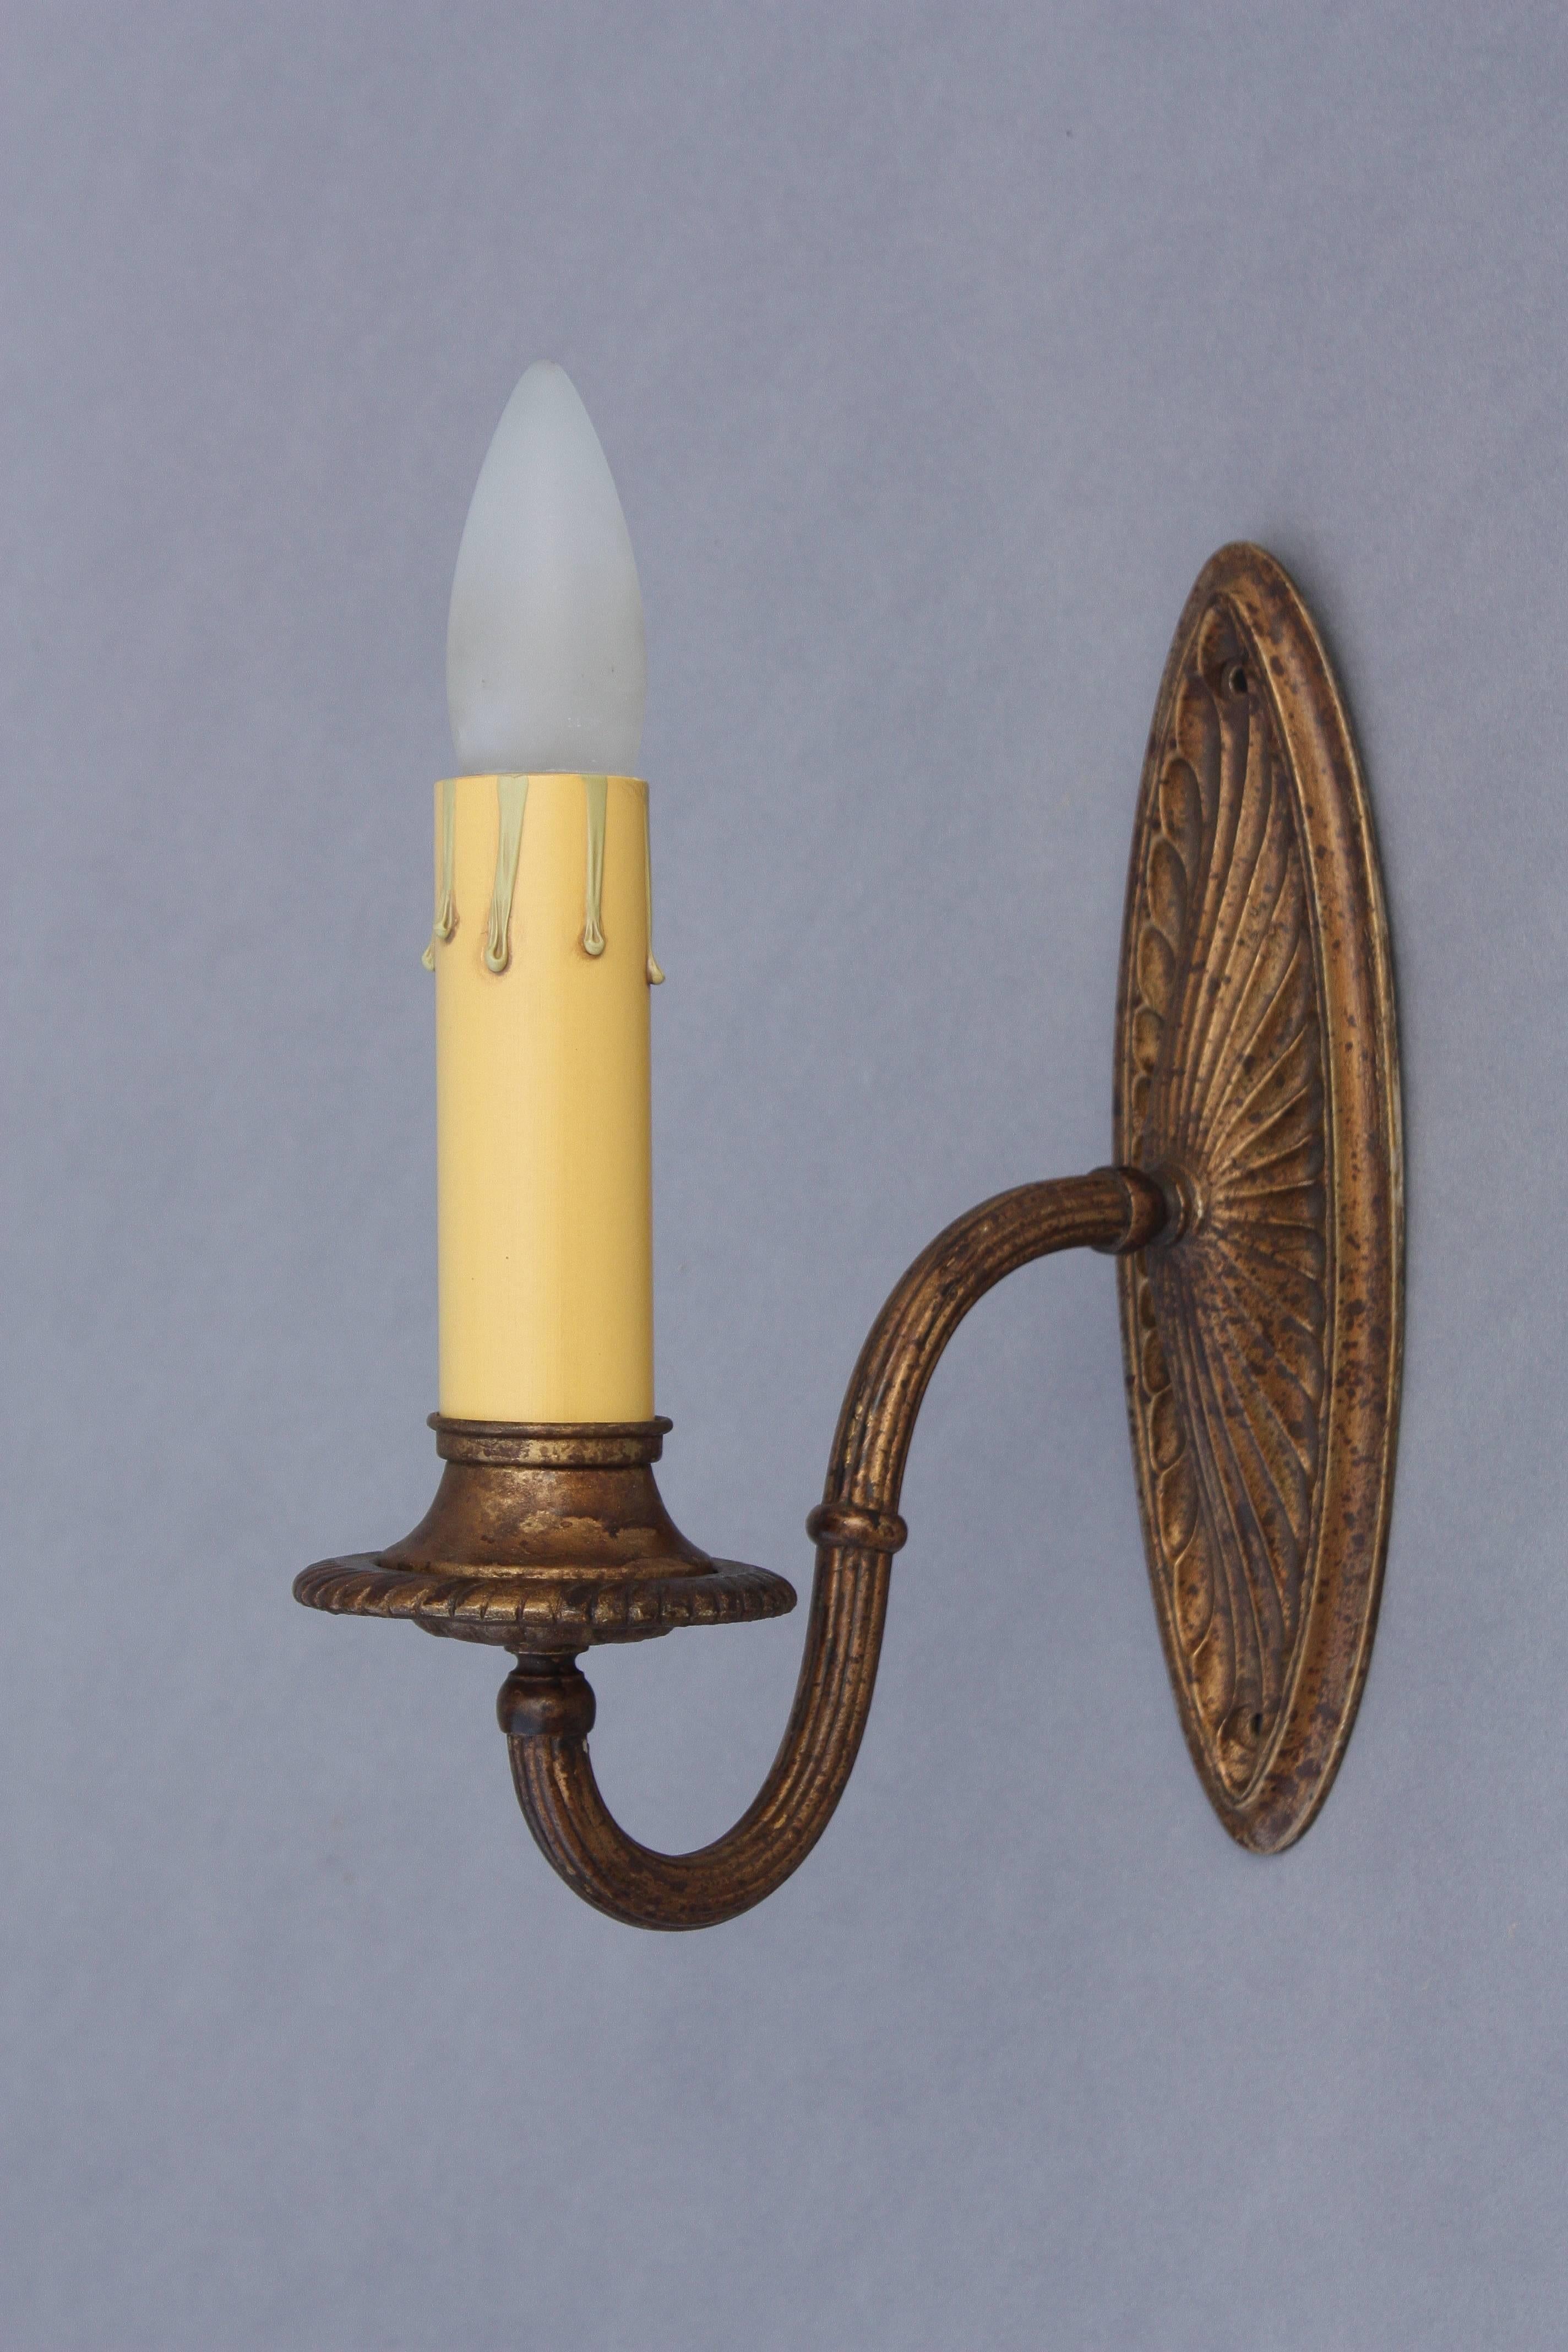 1 of 4 1920s sconces. Sold and priced individually. Note the backplate is not standard size.